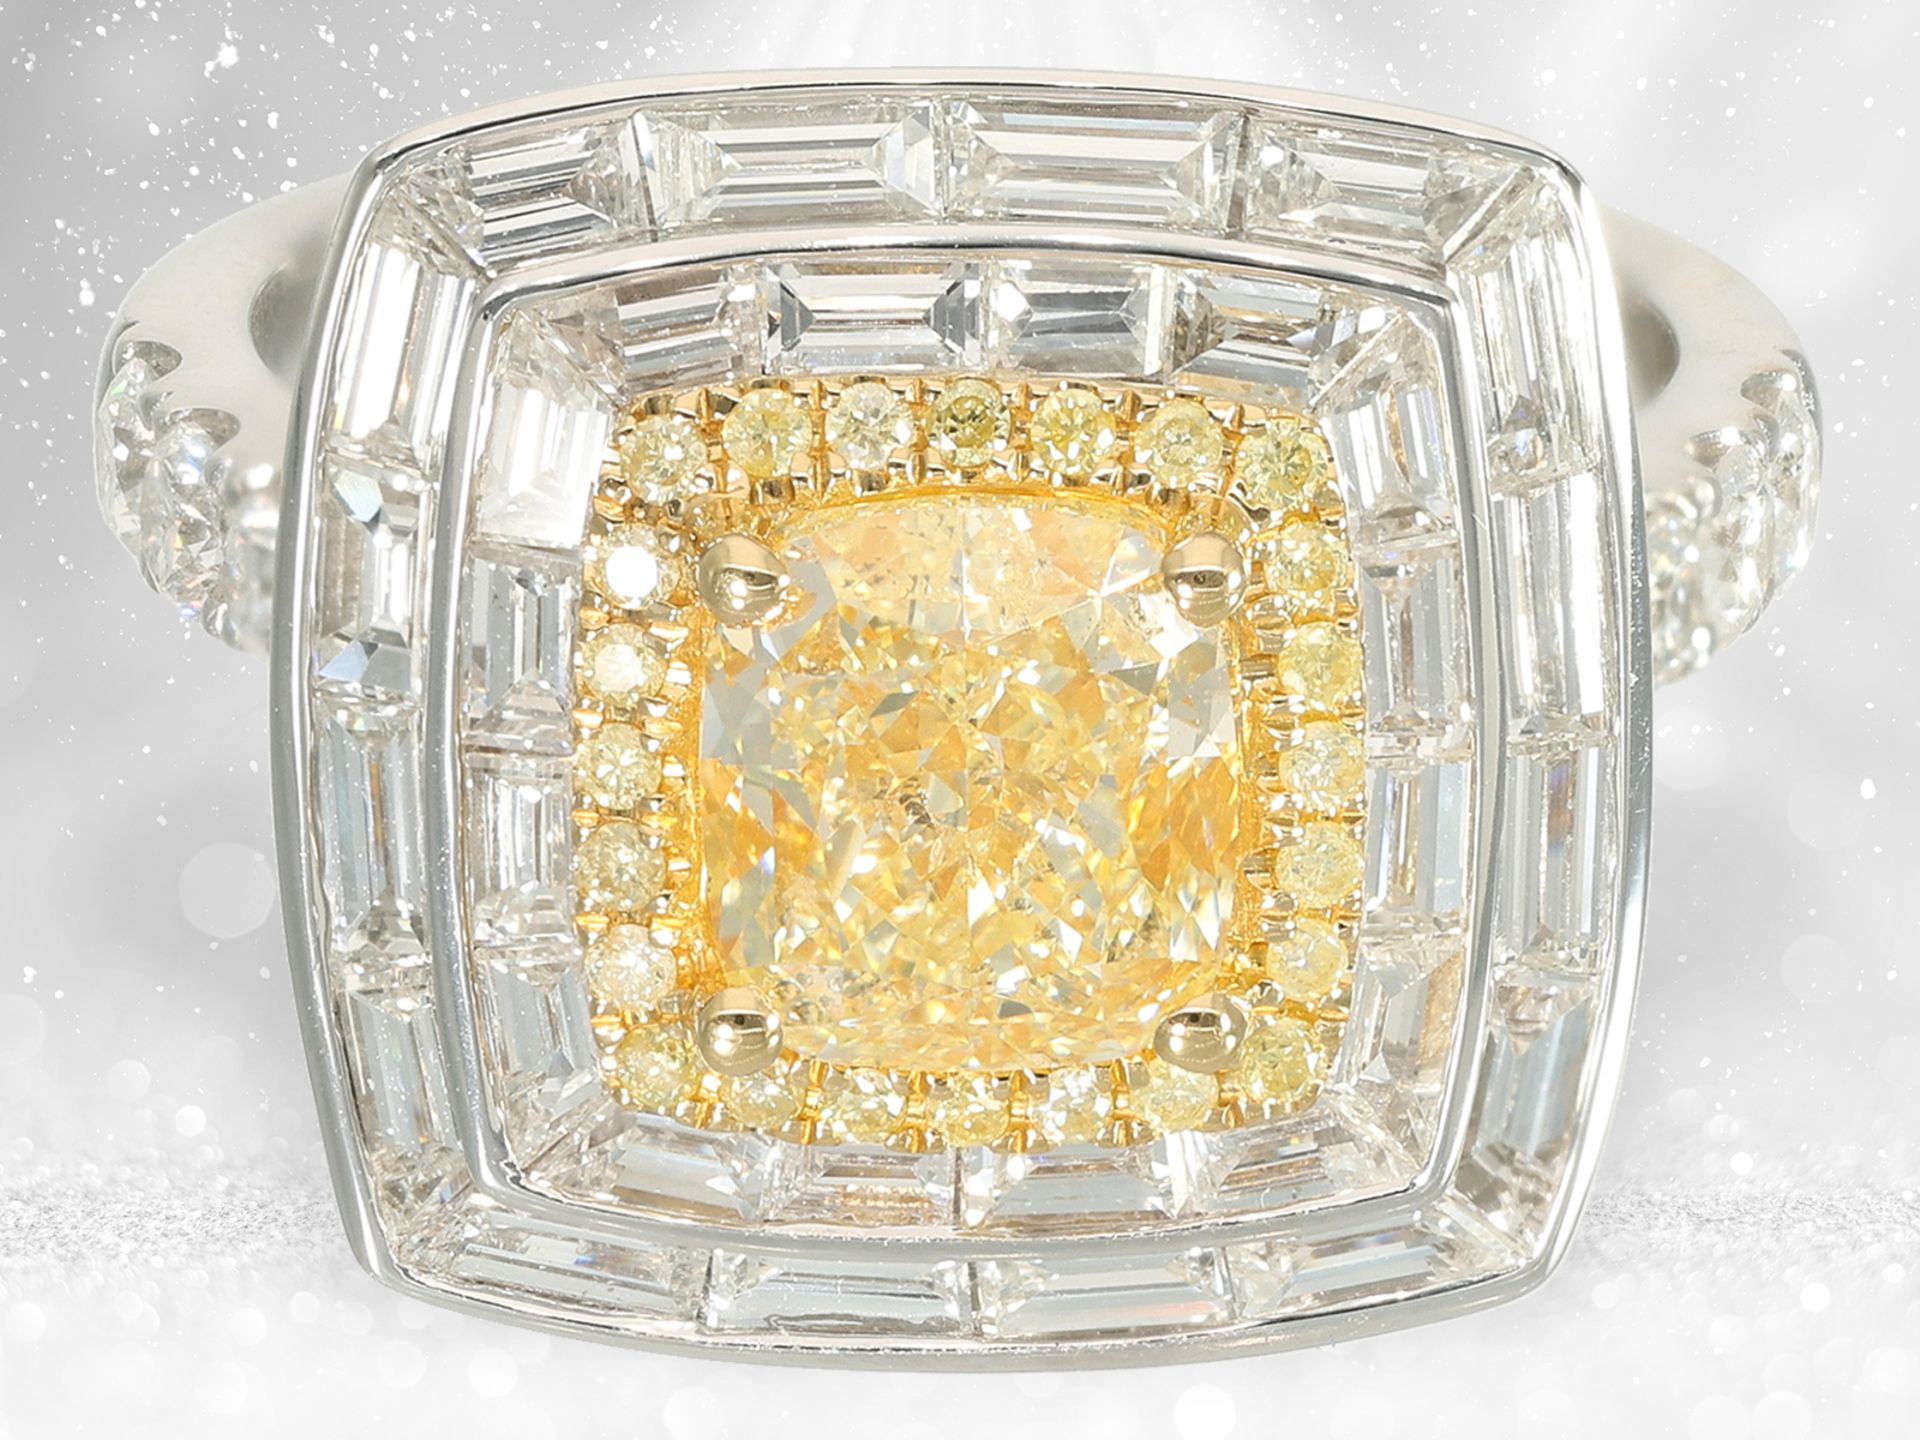 Ring: extremely elaborately crafted diamond ring, centre stone "Yellow Cushion" of 2ct - Image 3 of 5